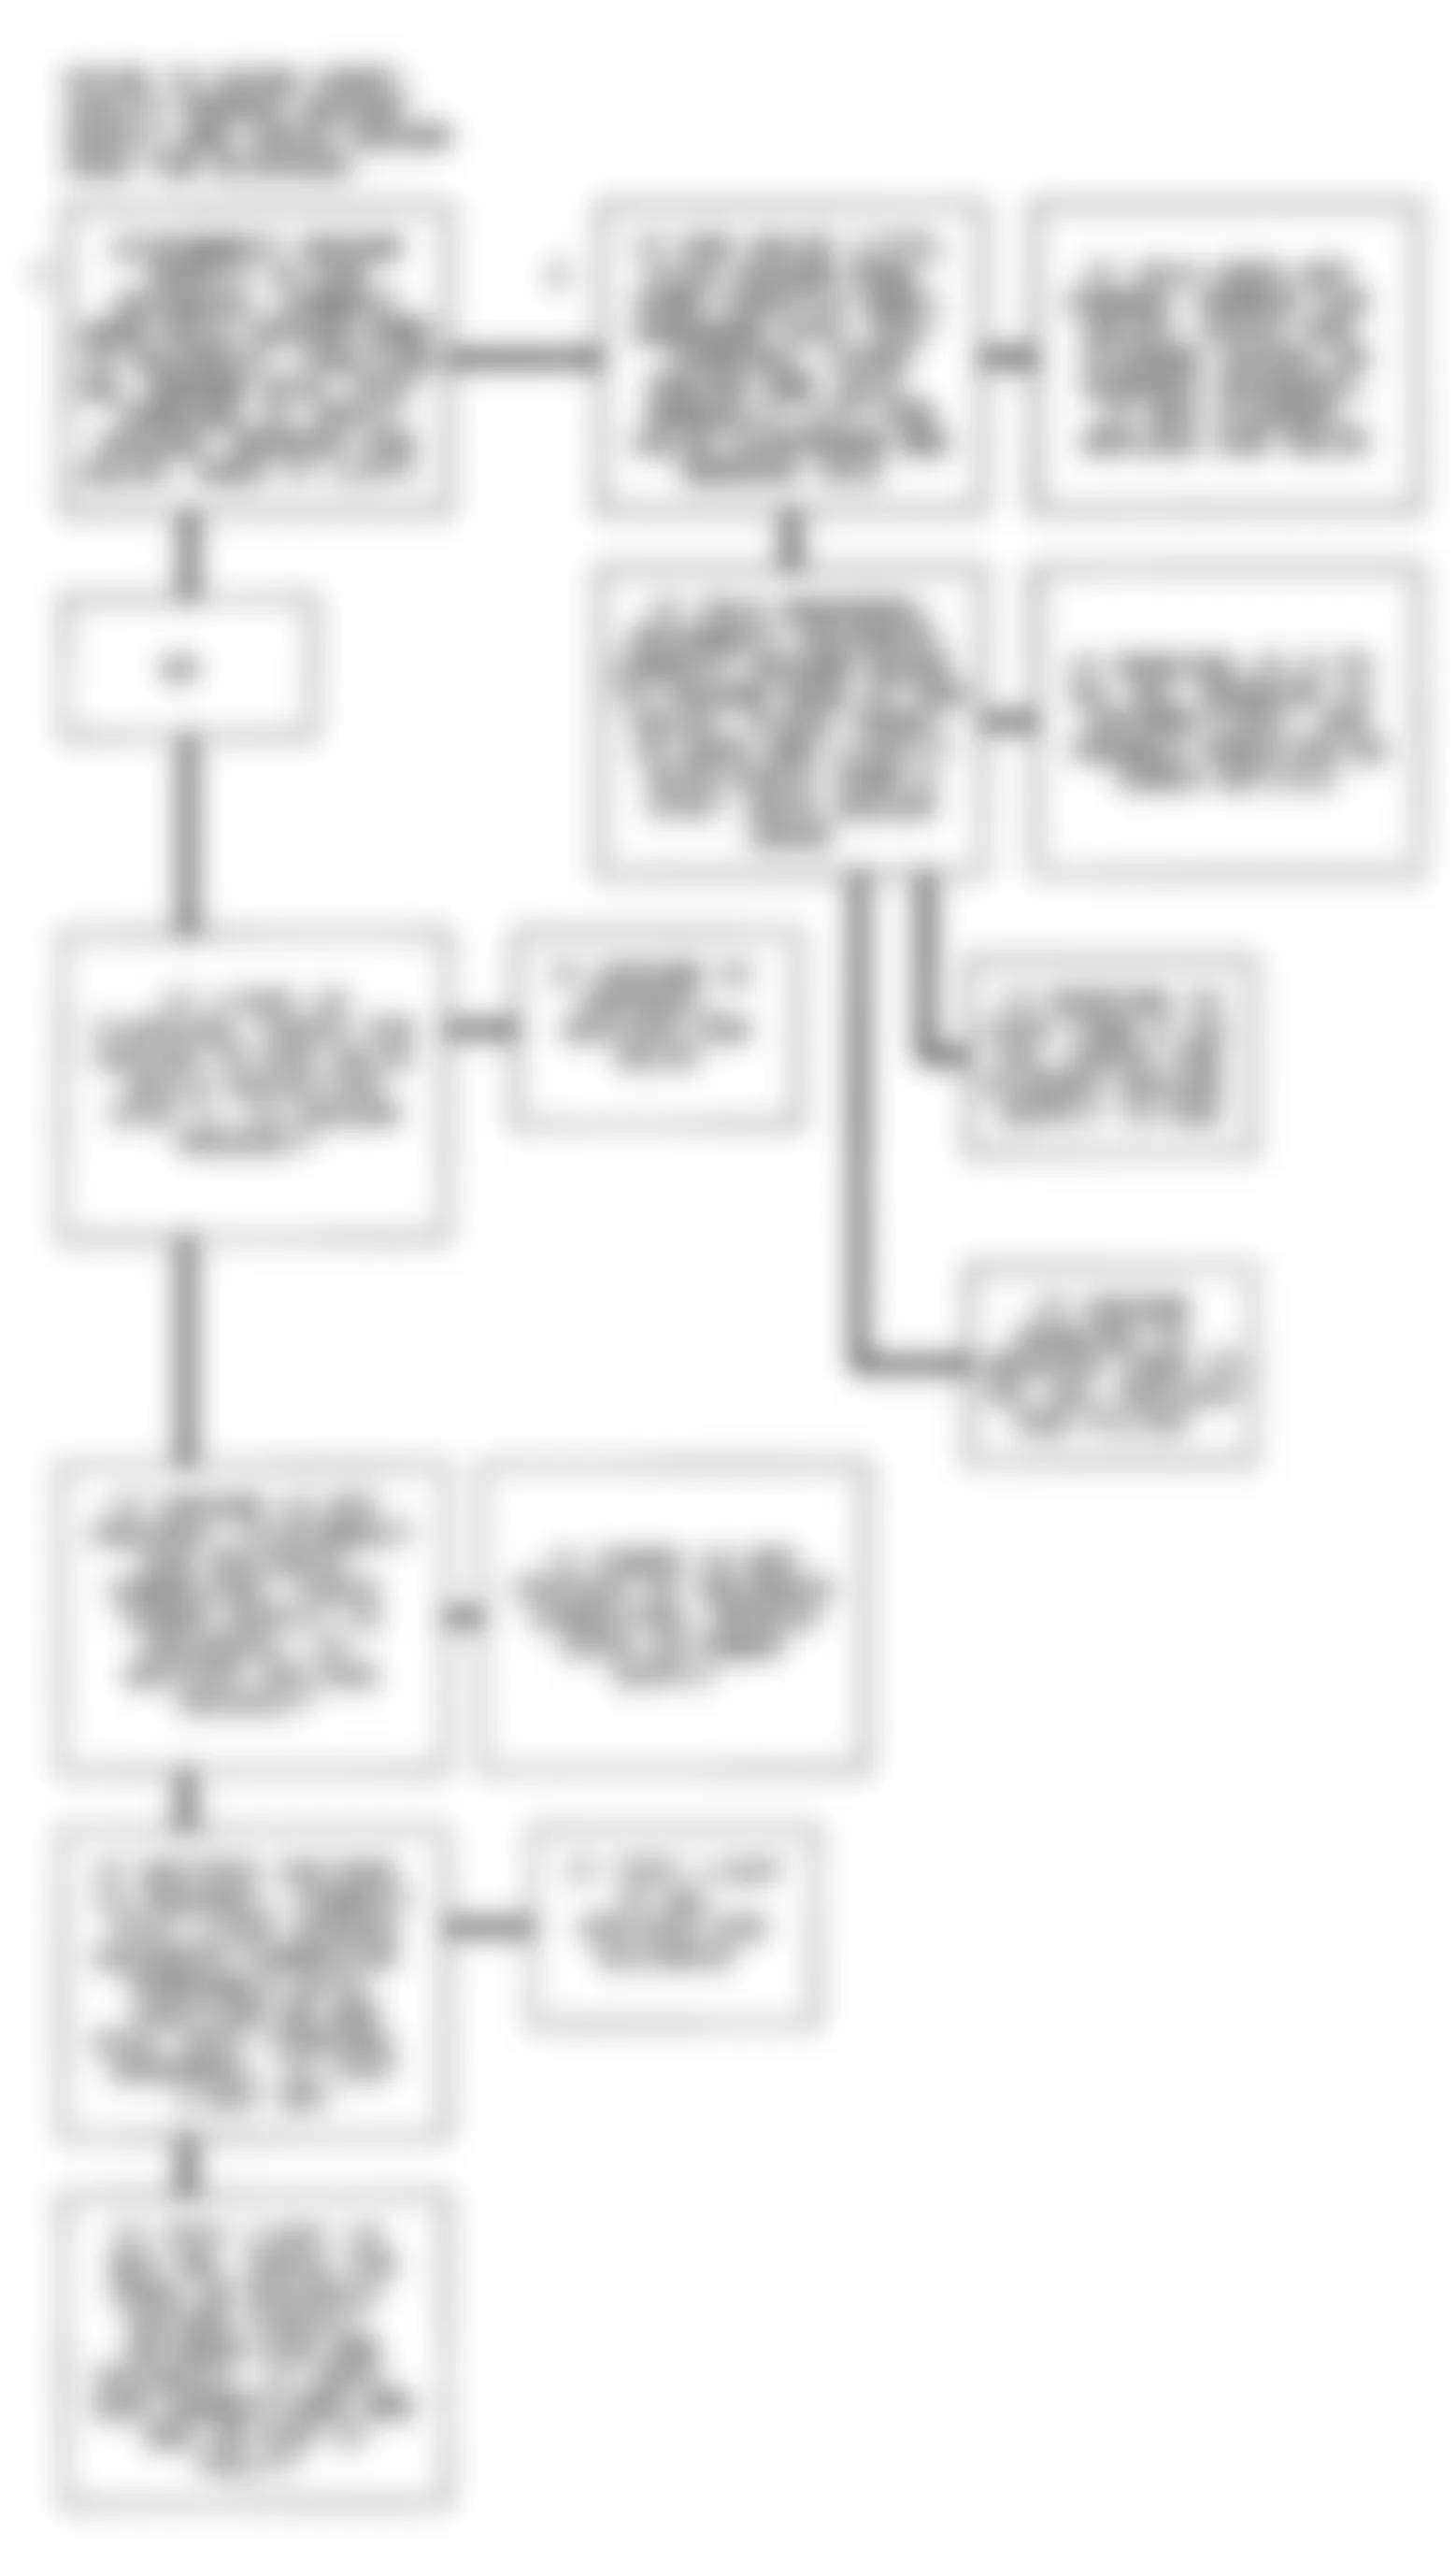 GMC S15 Jimmy 1991 - Component Locations -  Code 32 Flow Chart (3.1L) EGR System Error